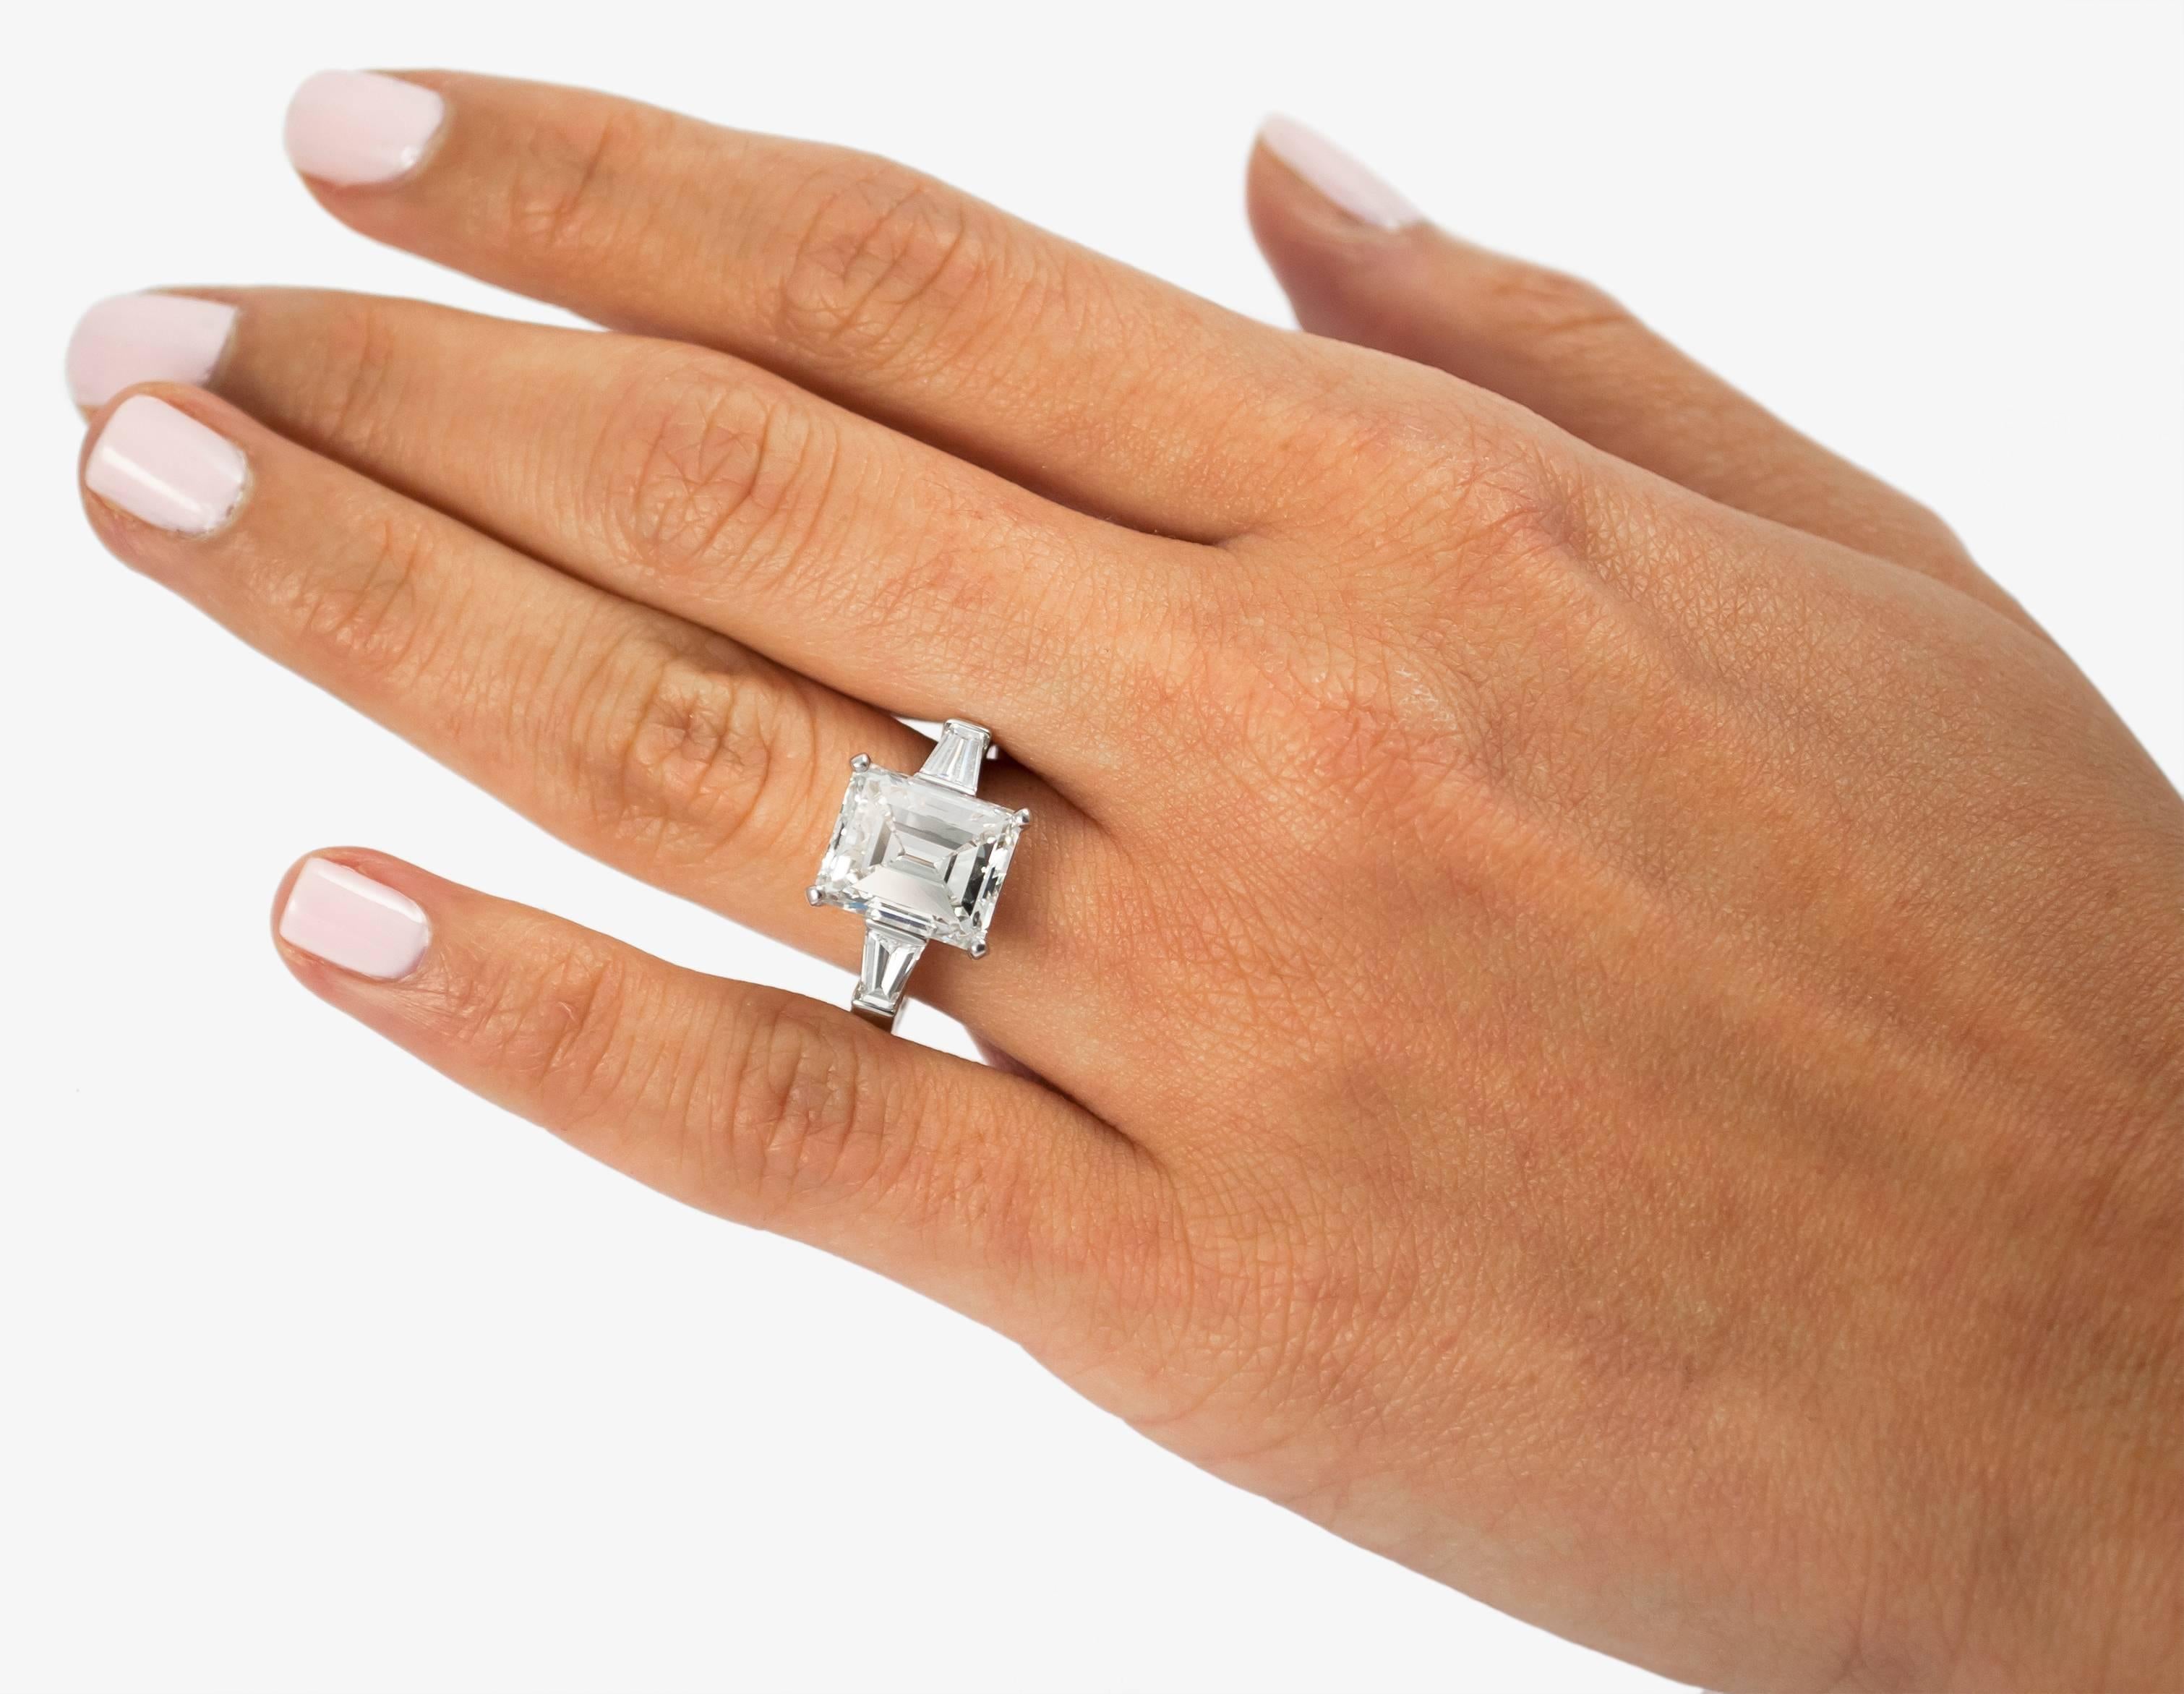 Classic BULGARI ring with tapered baguettes and made in platinum. Being of H color and VVS2 clarity it is a timeless piece that will never go out of style.

This ring comes with a GIA Certificate #1172227302 that states this diamond is of H color